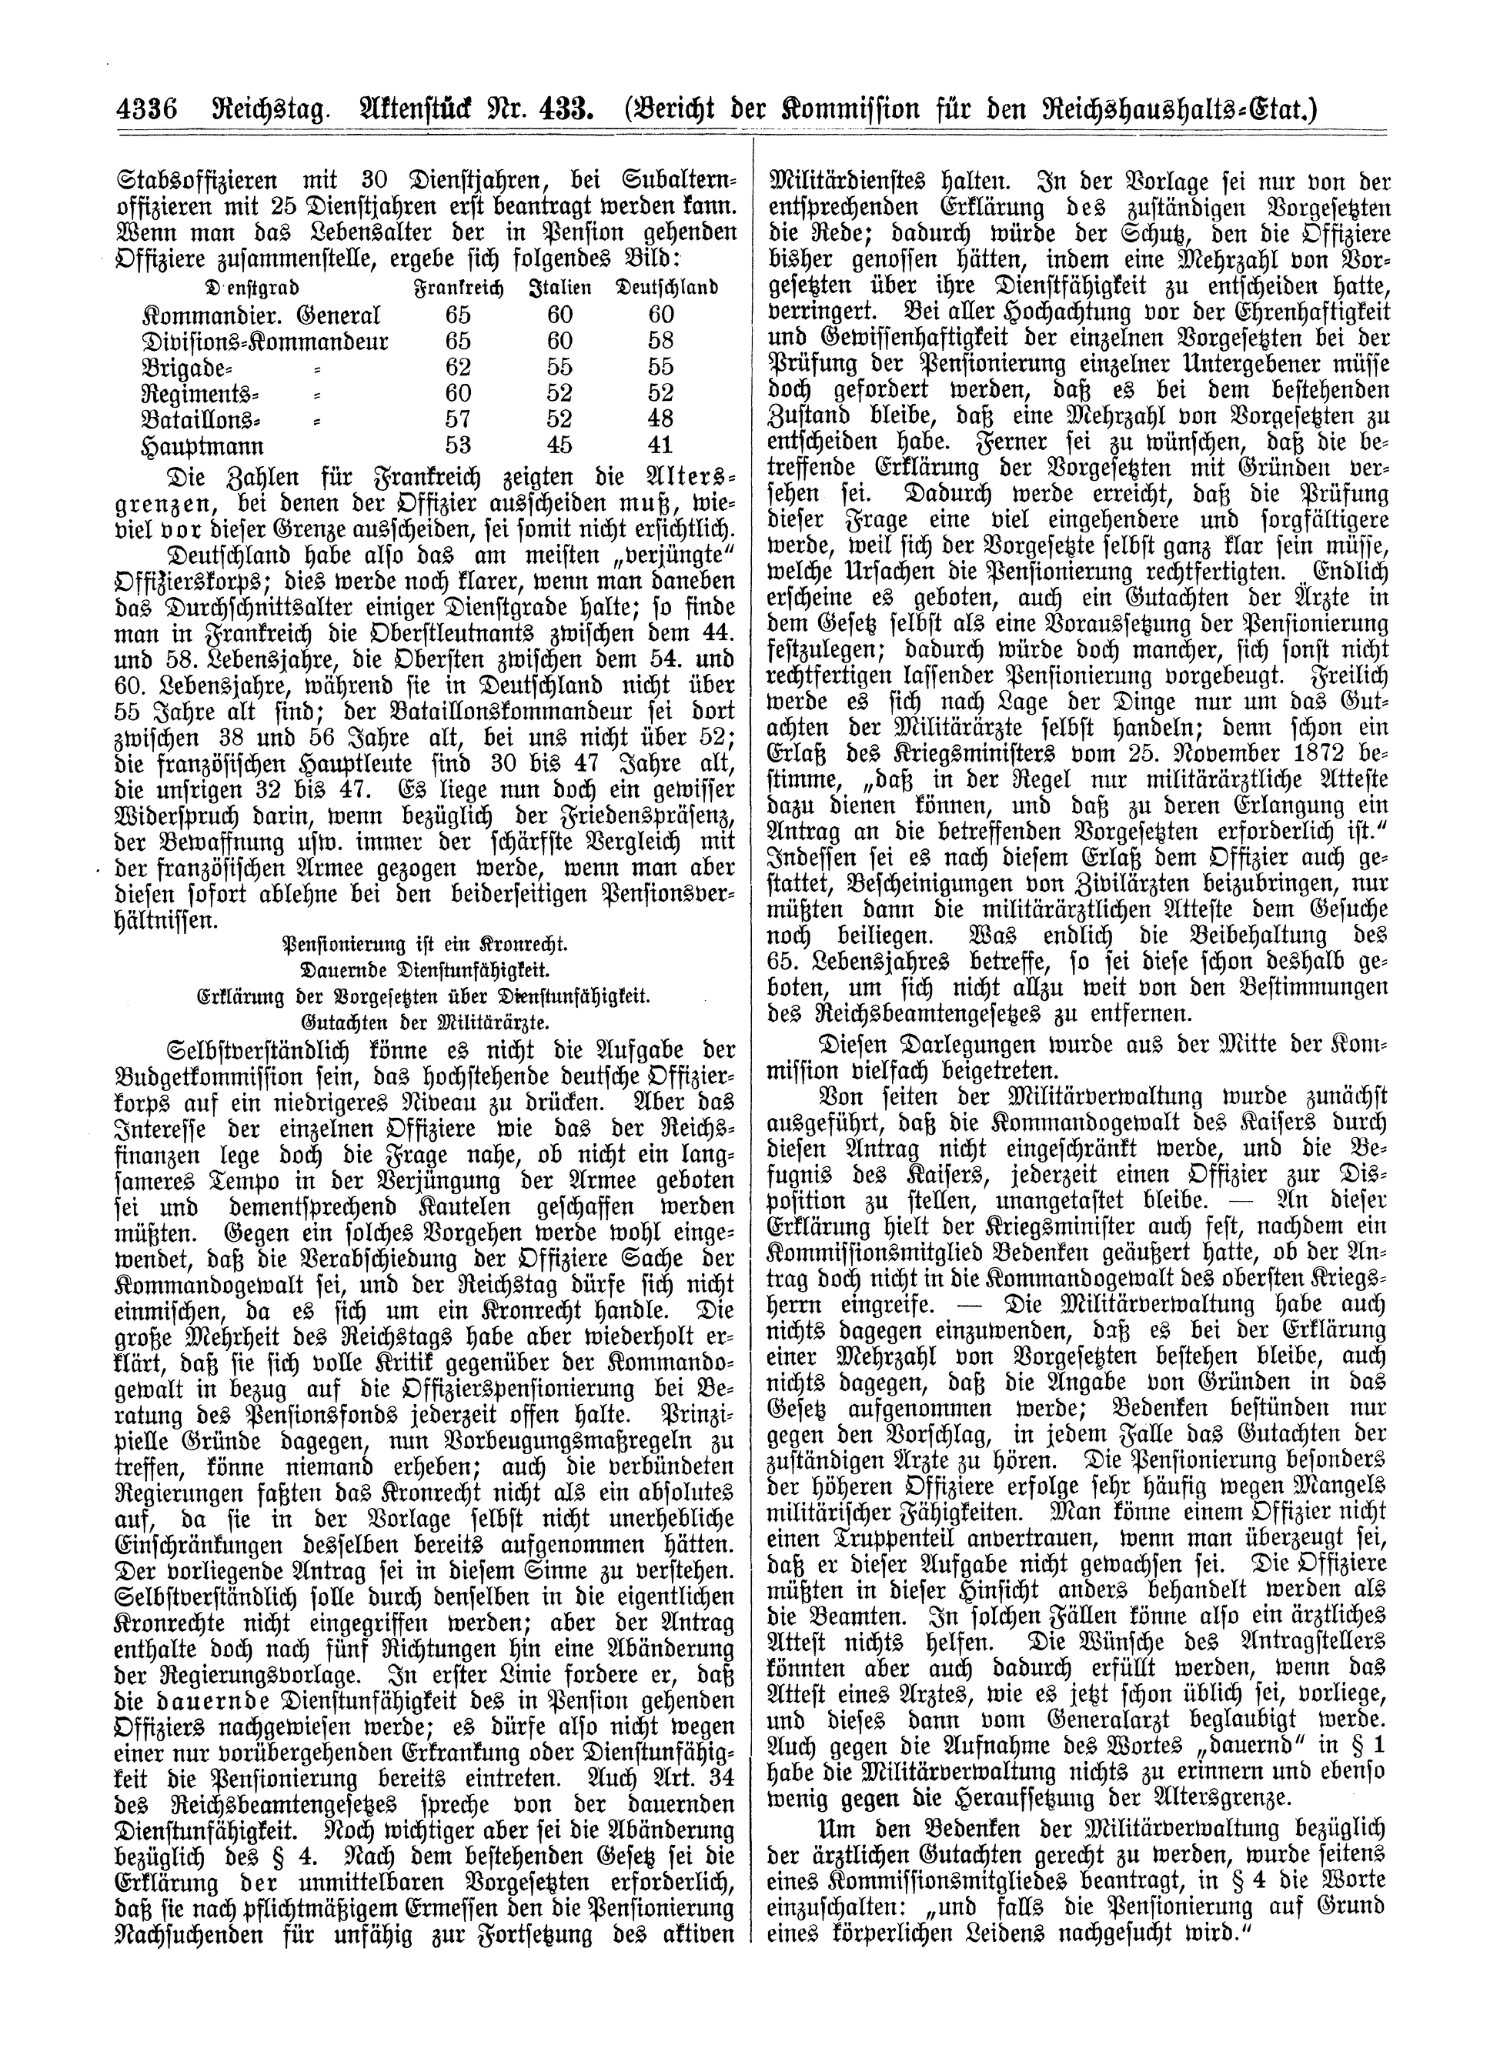 Scan of page 4336